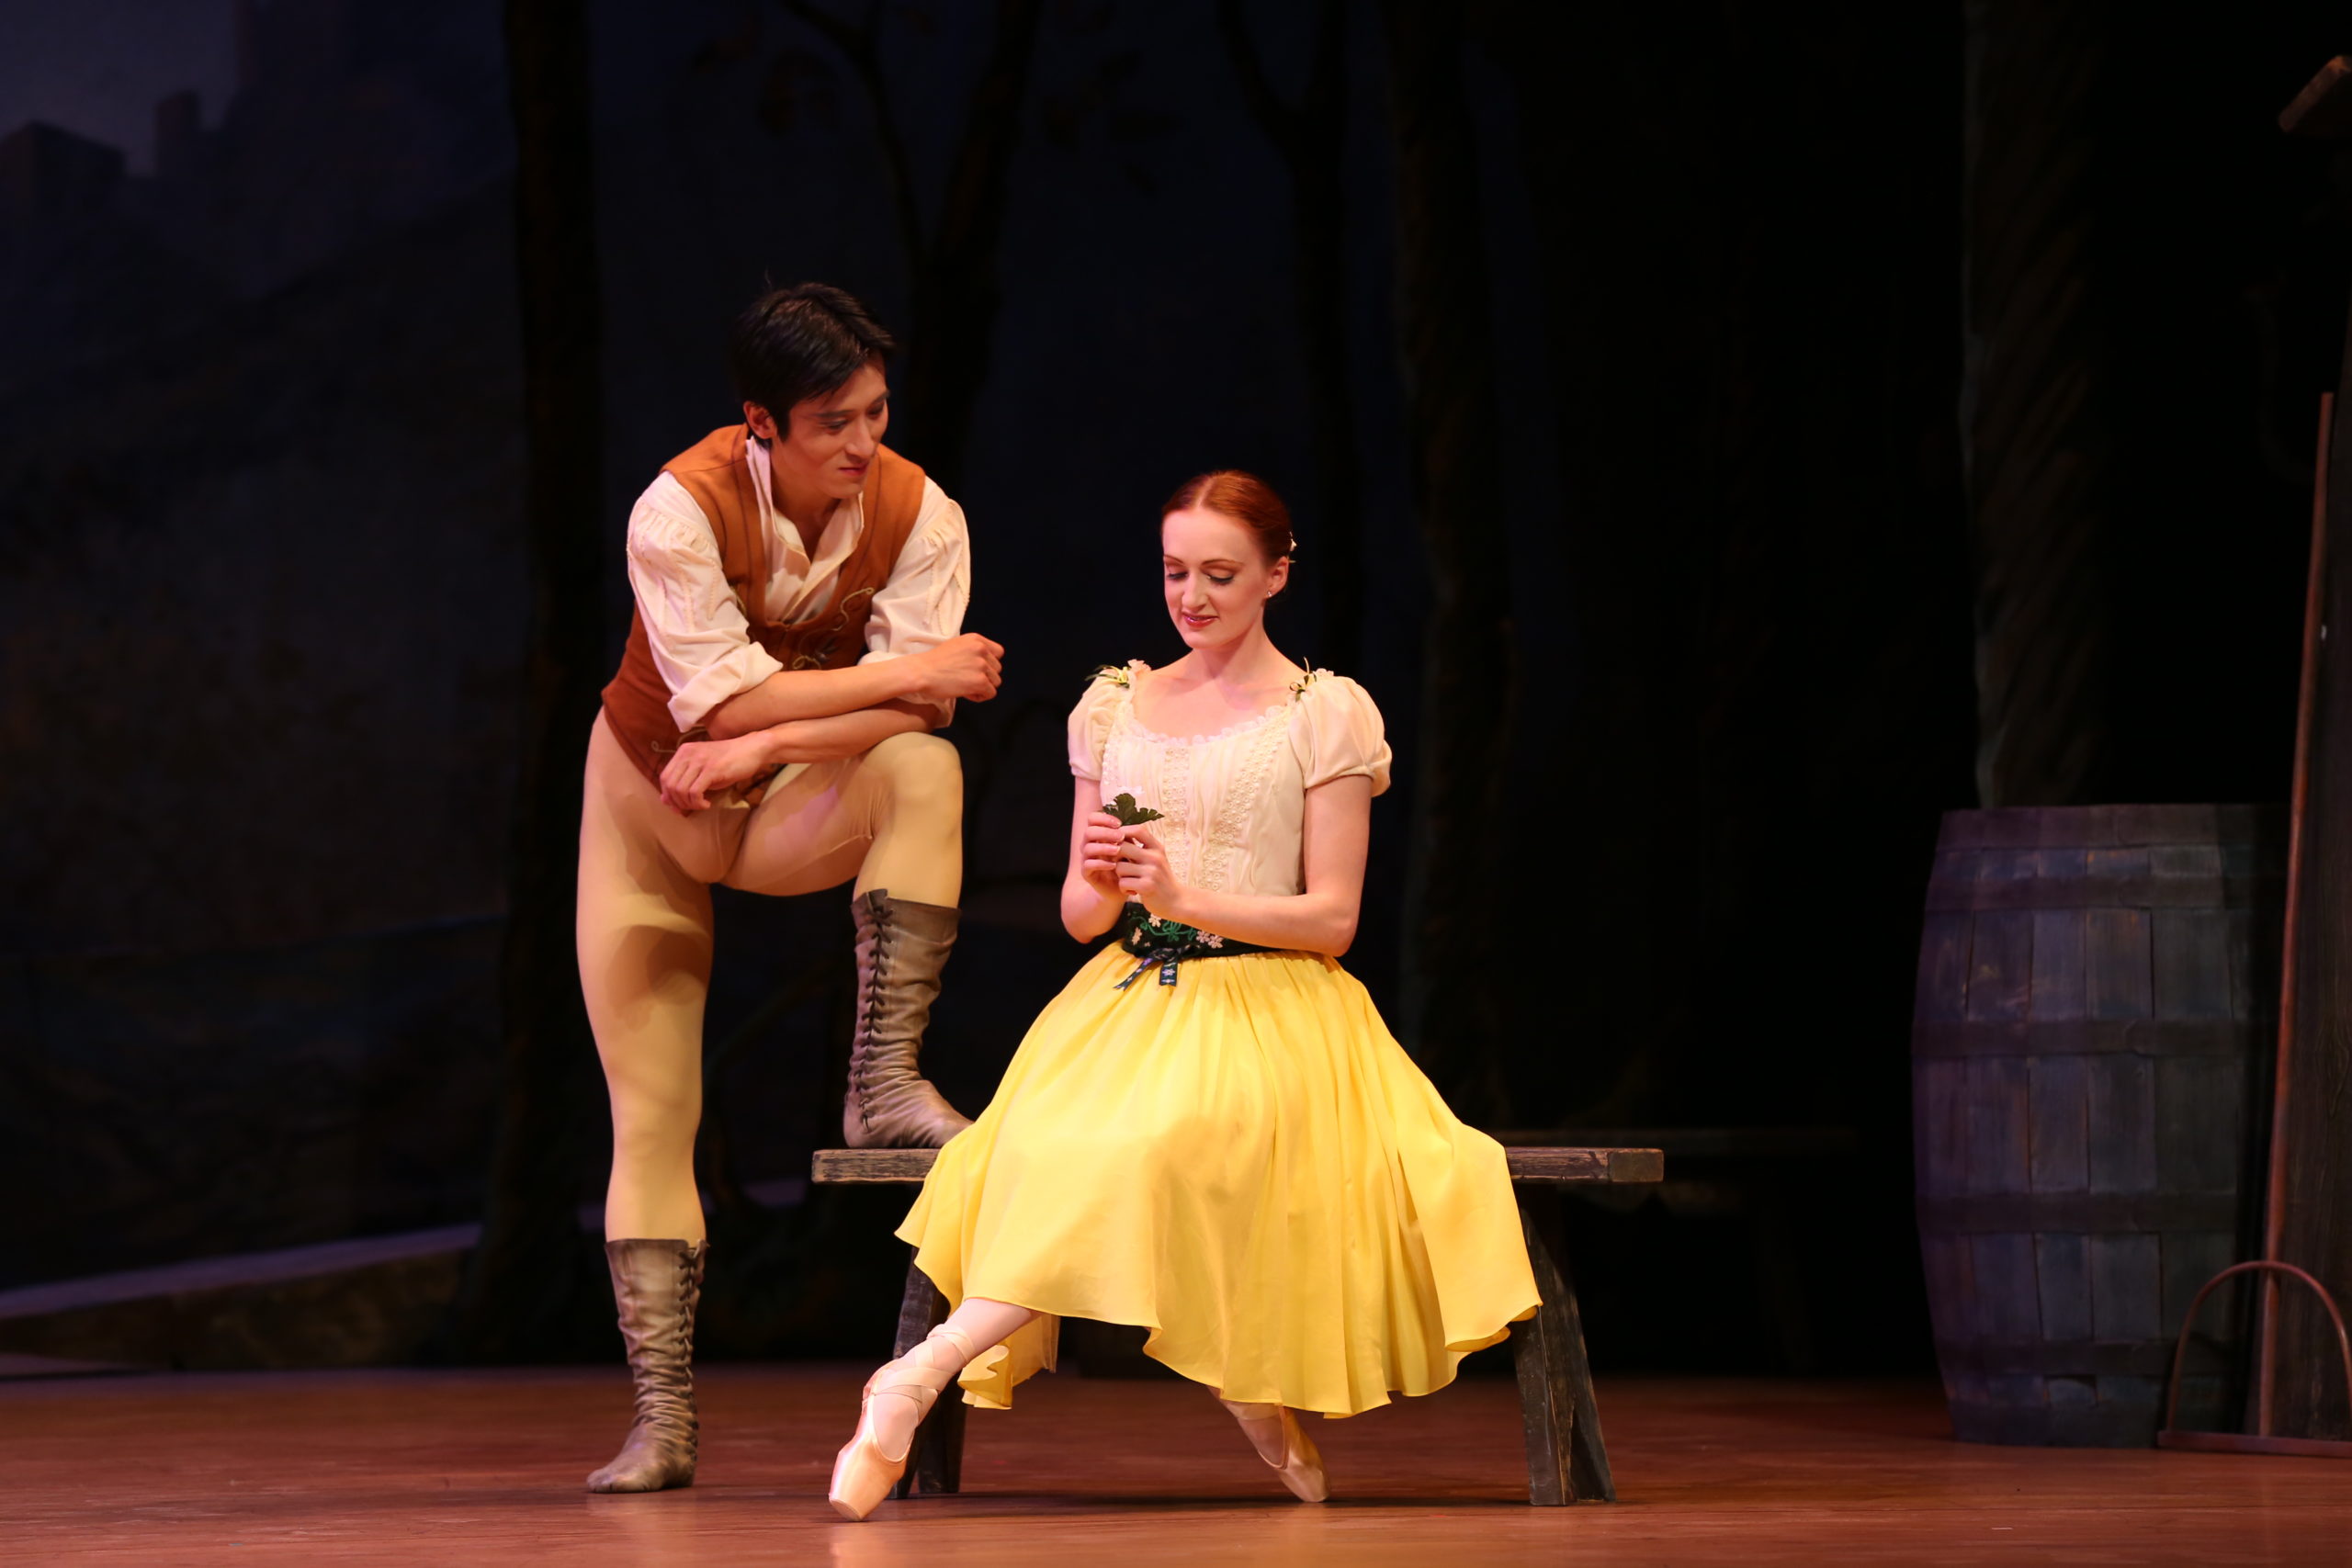 A scene from Giselle with two dancers, one sitting on a bench, the other offering a flower.